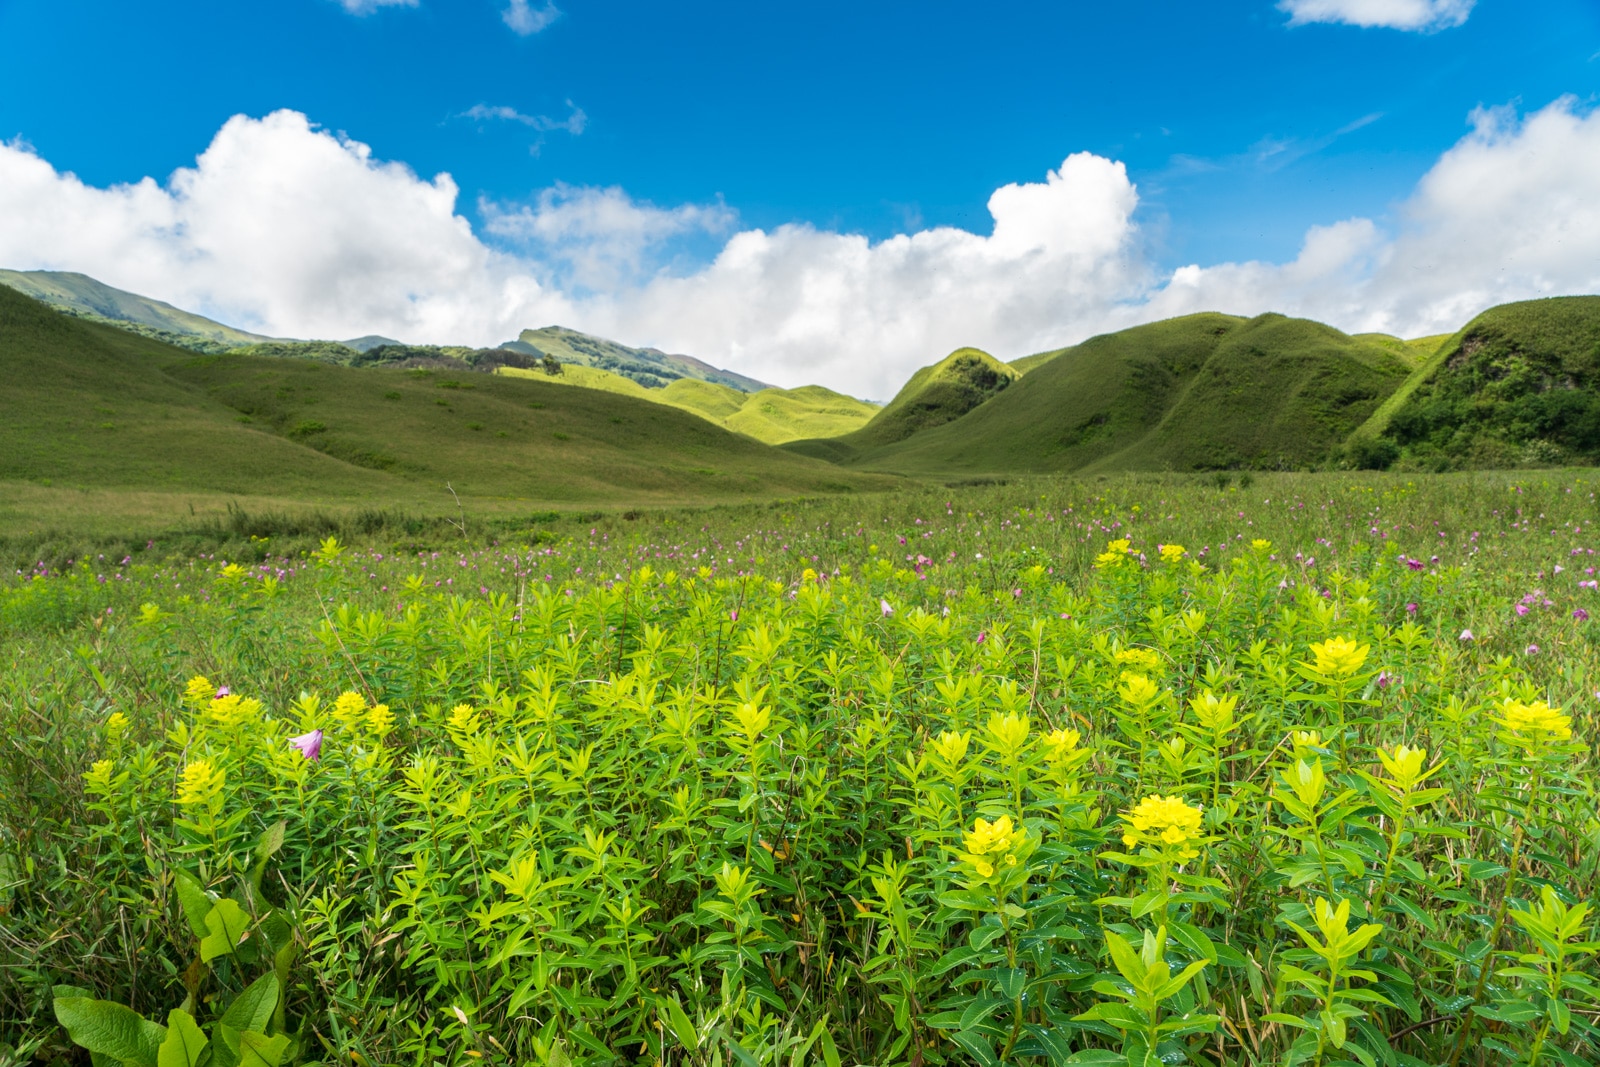 Yellow flowers blooming in Dzukou Valley